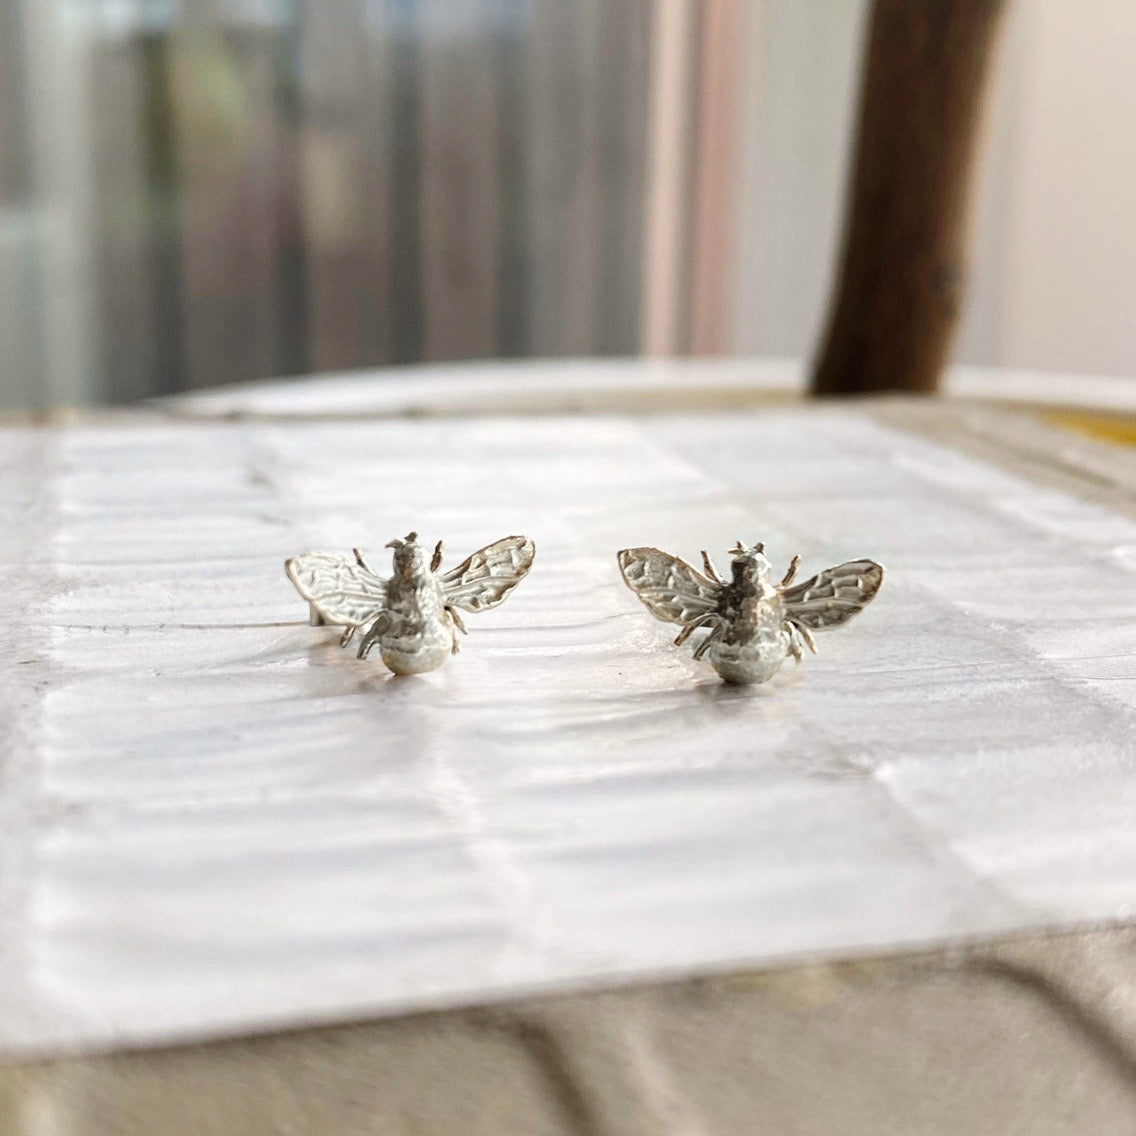 Bee Mine - Solid silver or gold bumble bee earrings